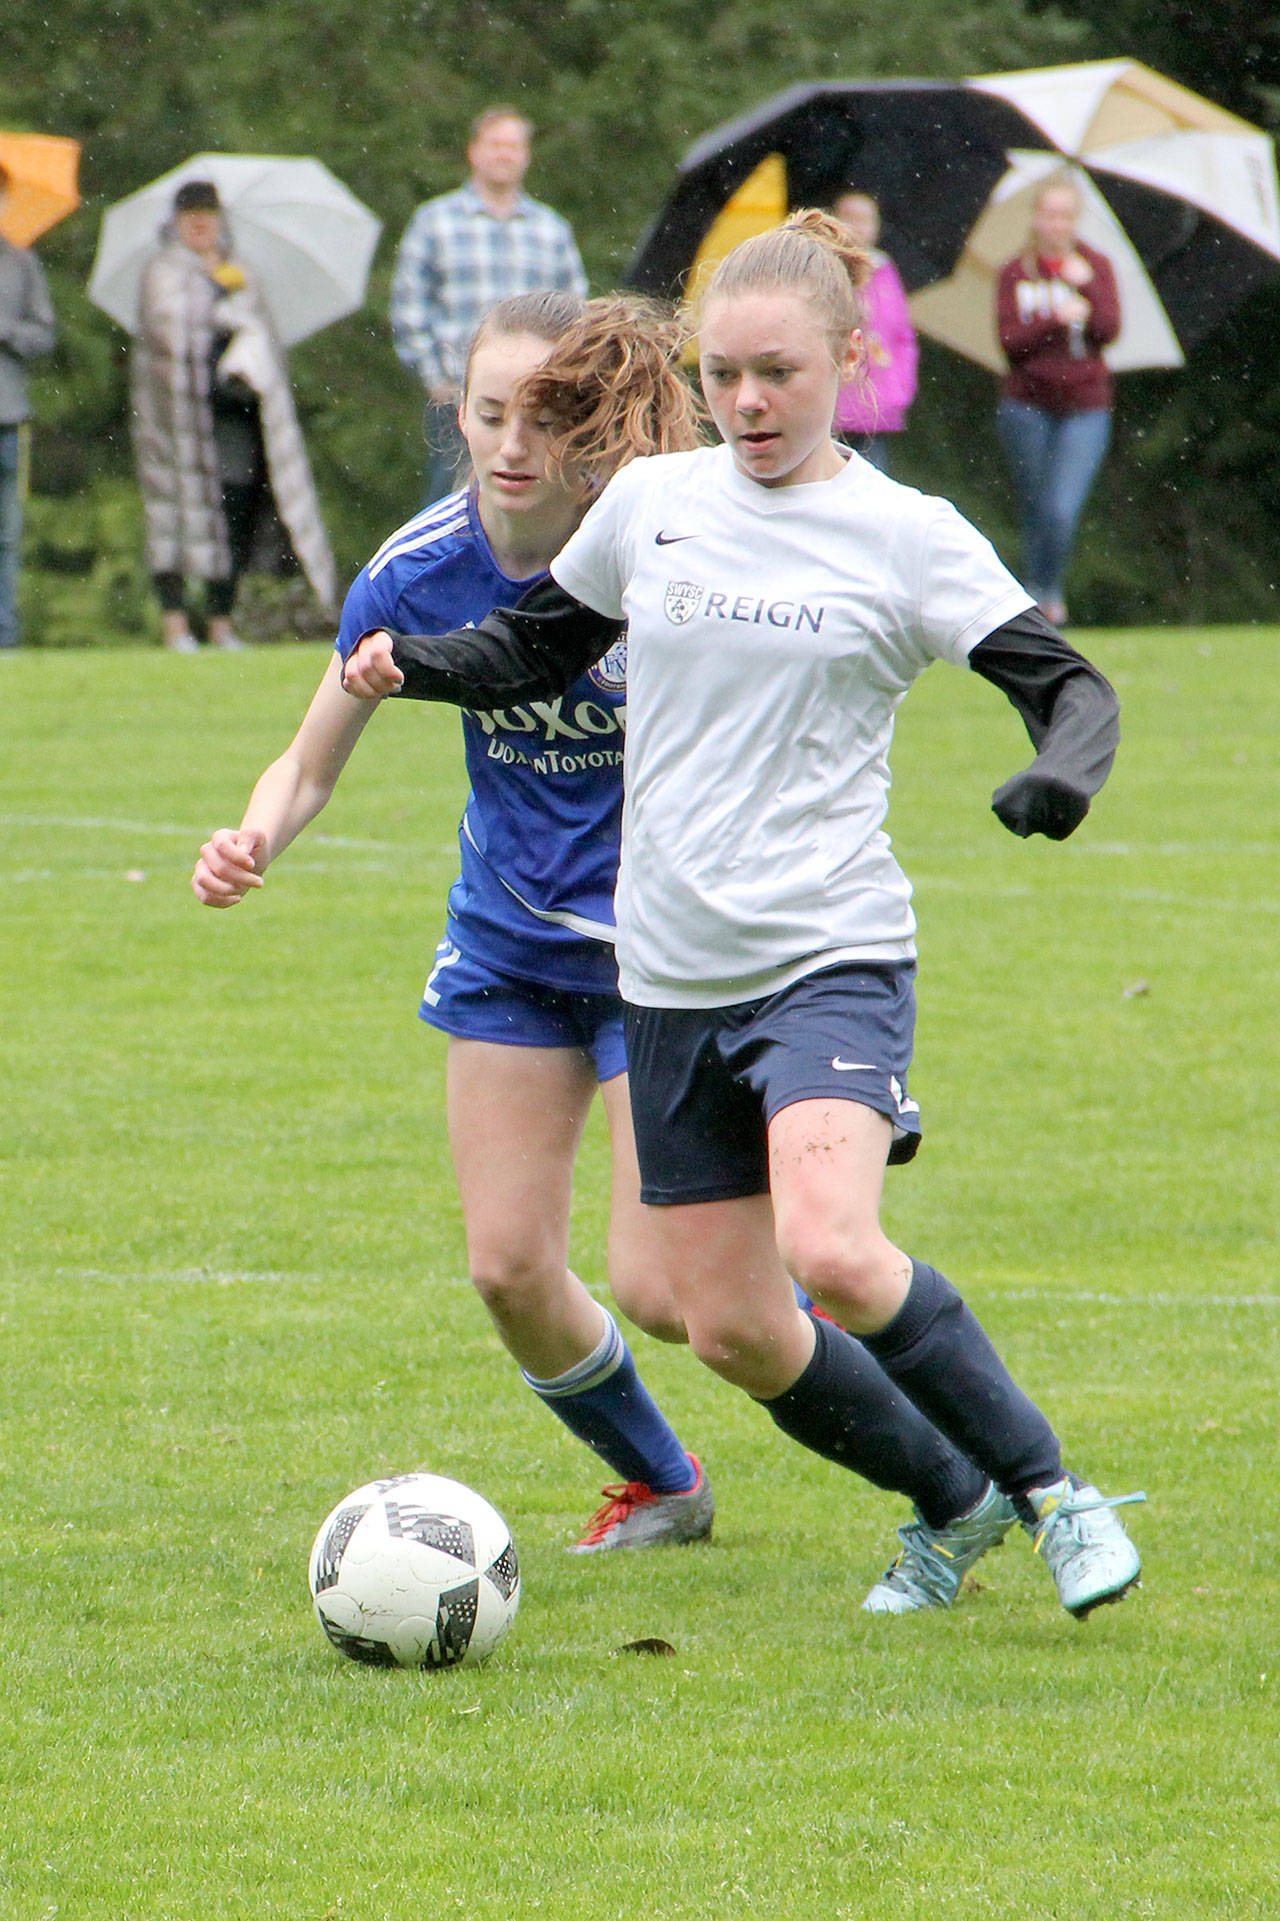 South Whidbey Reign U-16 girls soccer team in semifinals